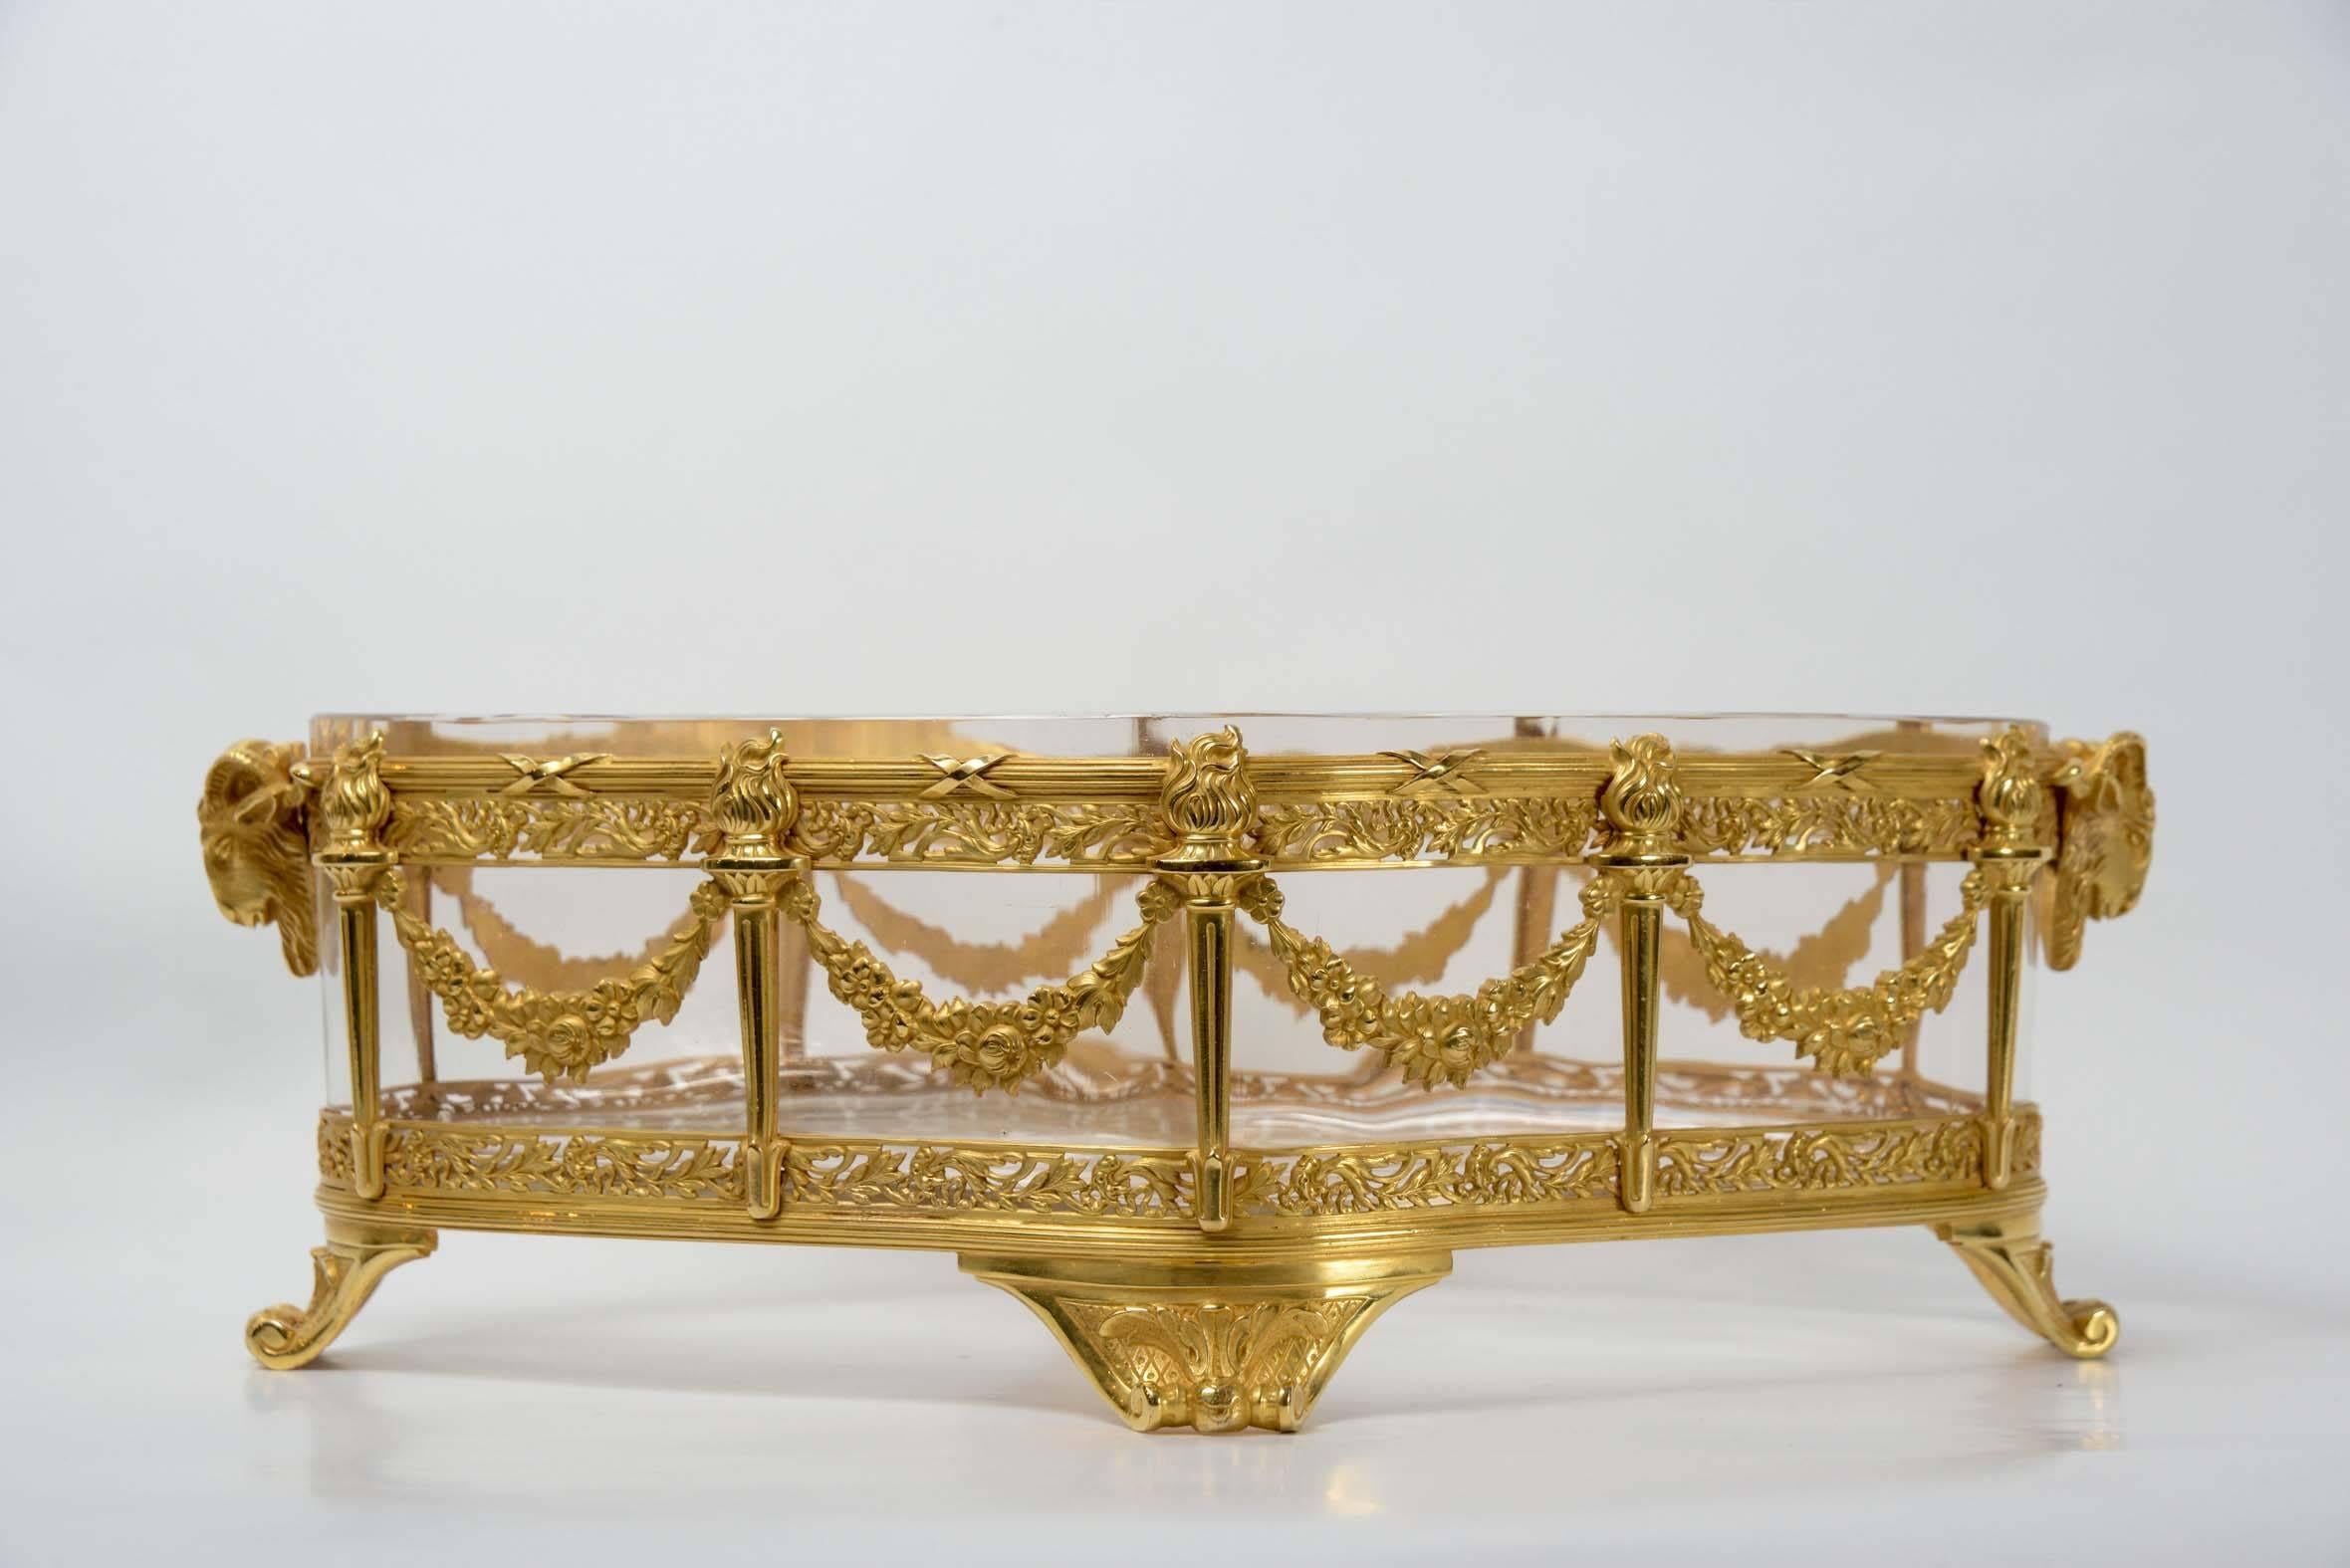 Oval center of table - crystal and gilded bronze very finely chiseled.